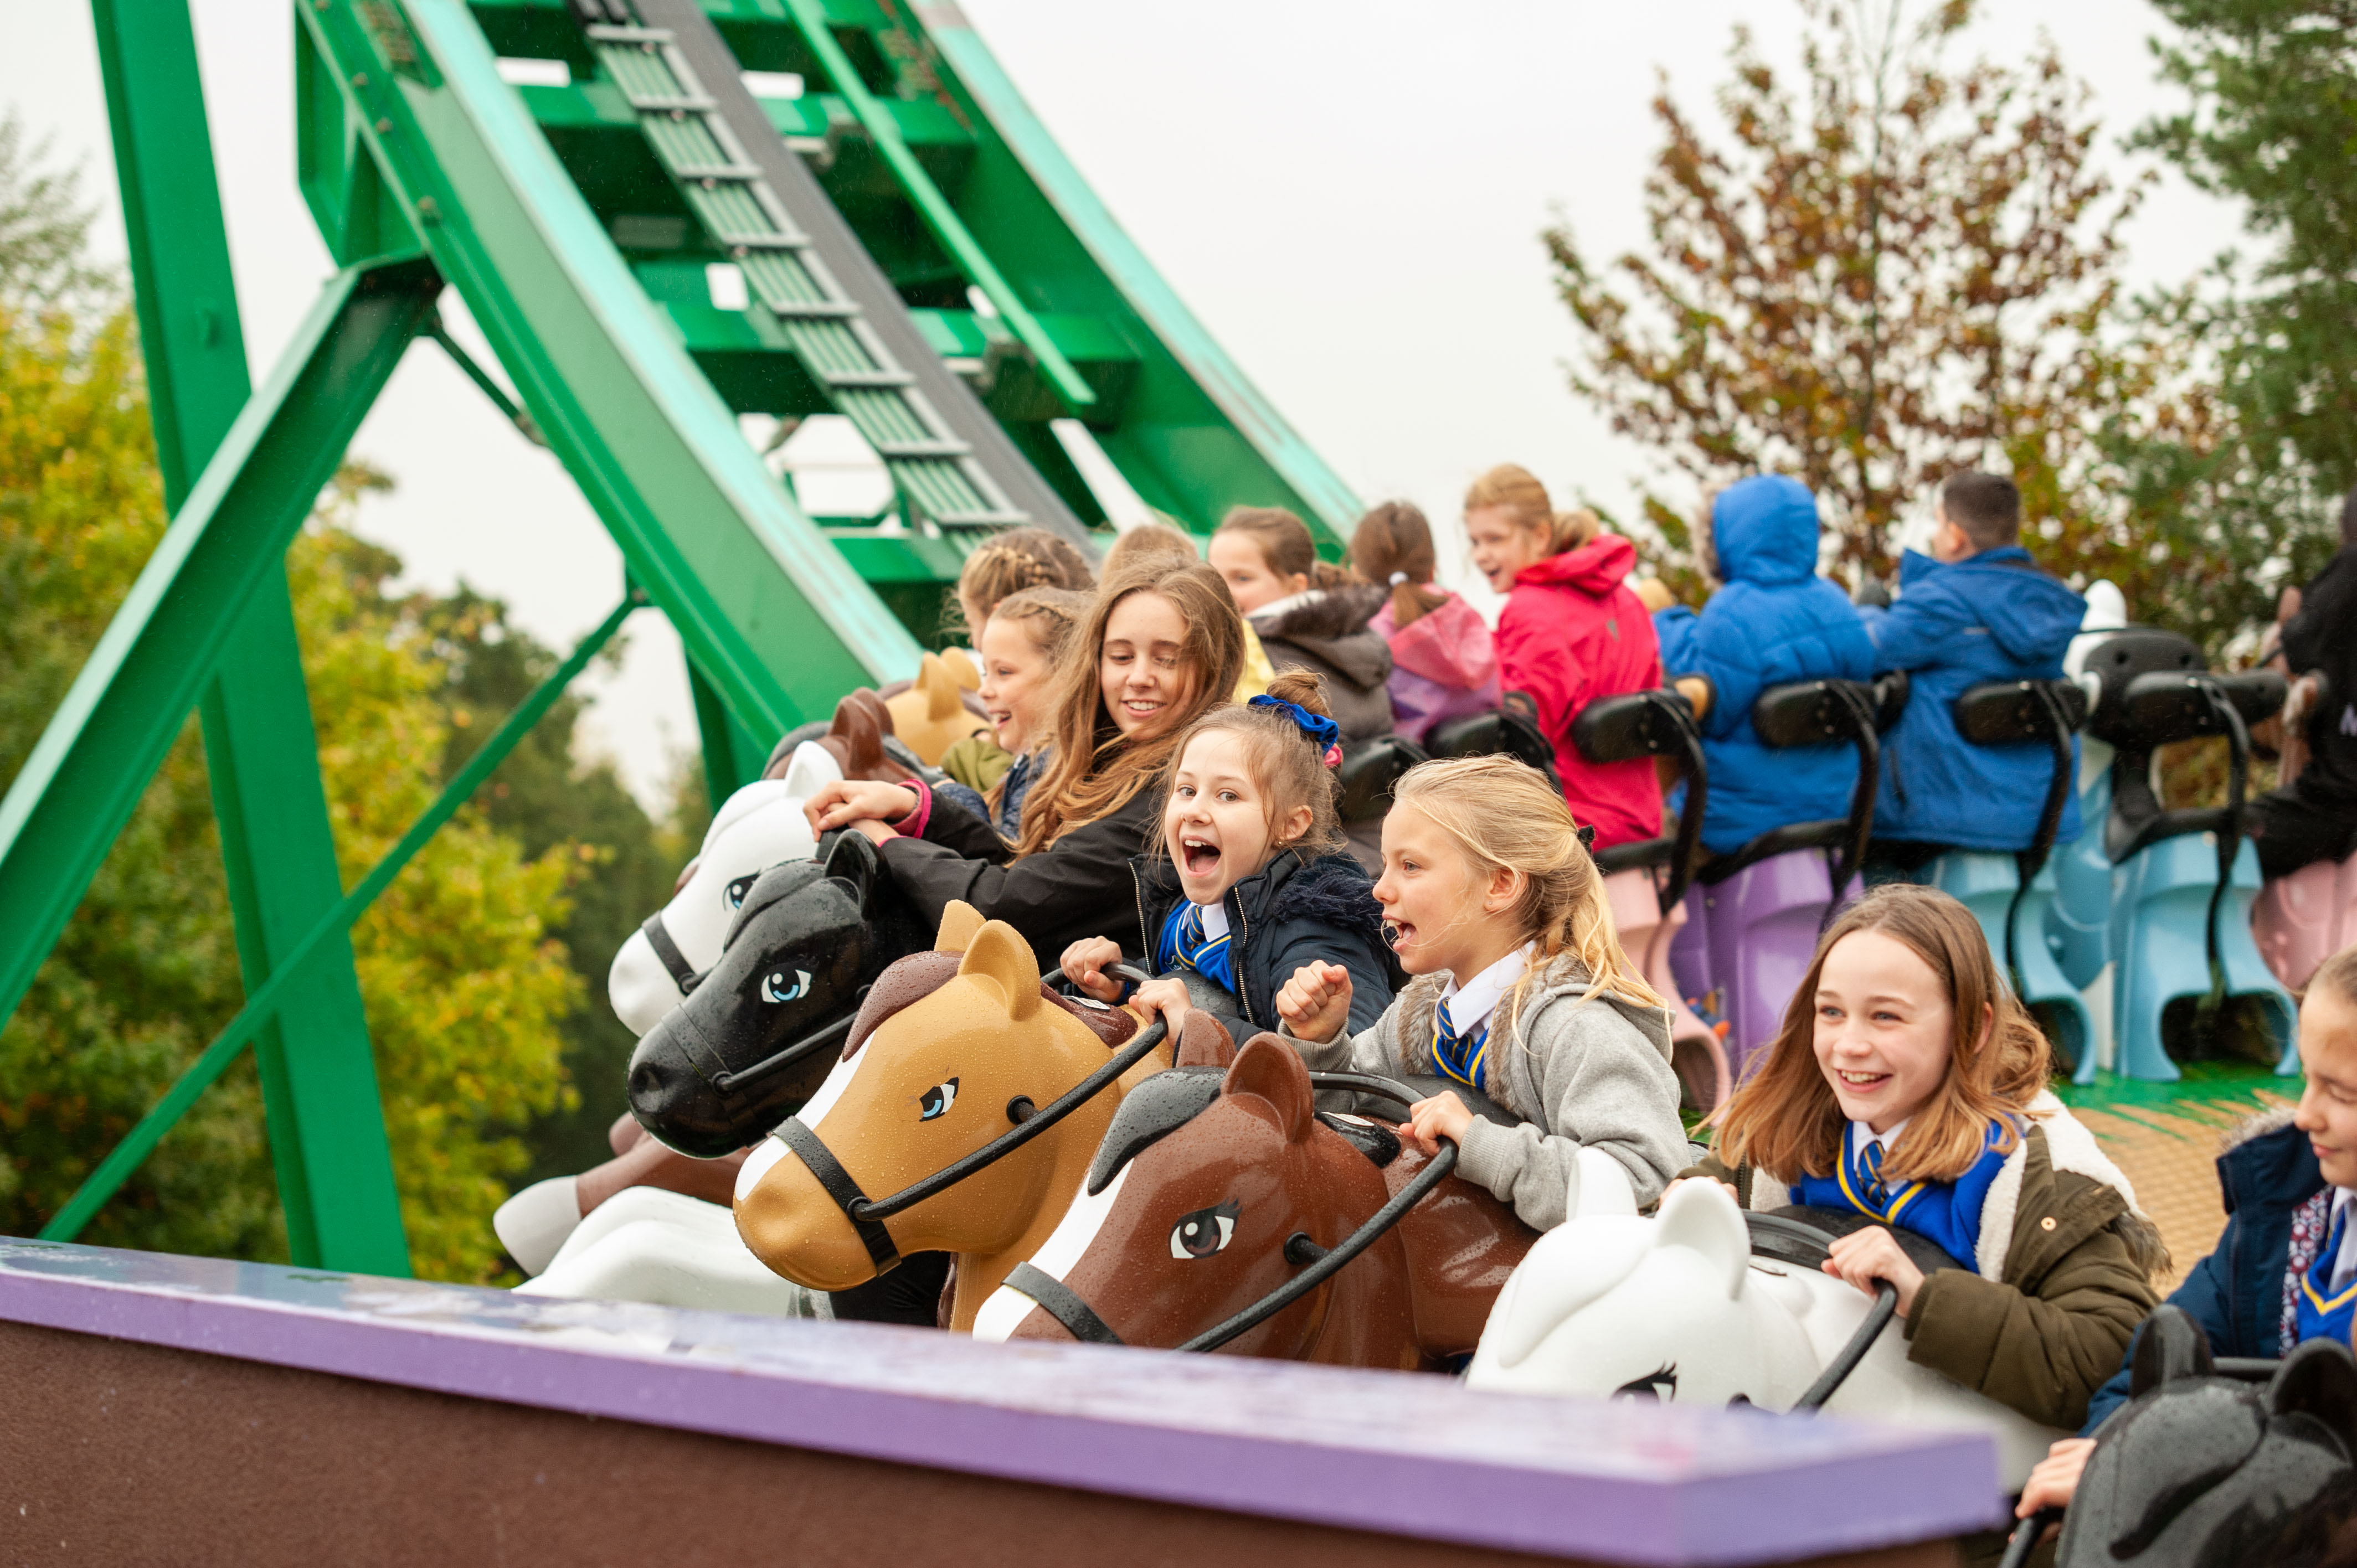 School group at Mia's Riding Adventure at the LEGOLAND® Windsor Resort